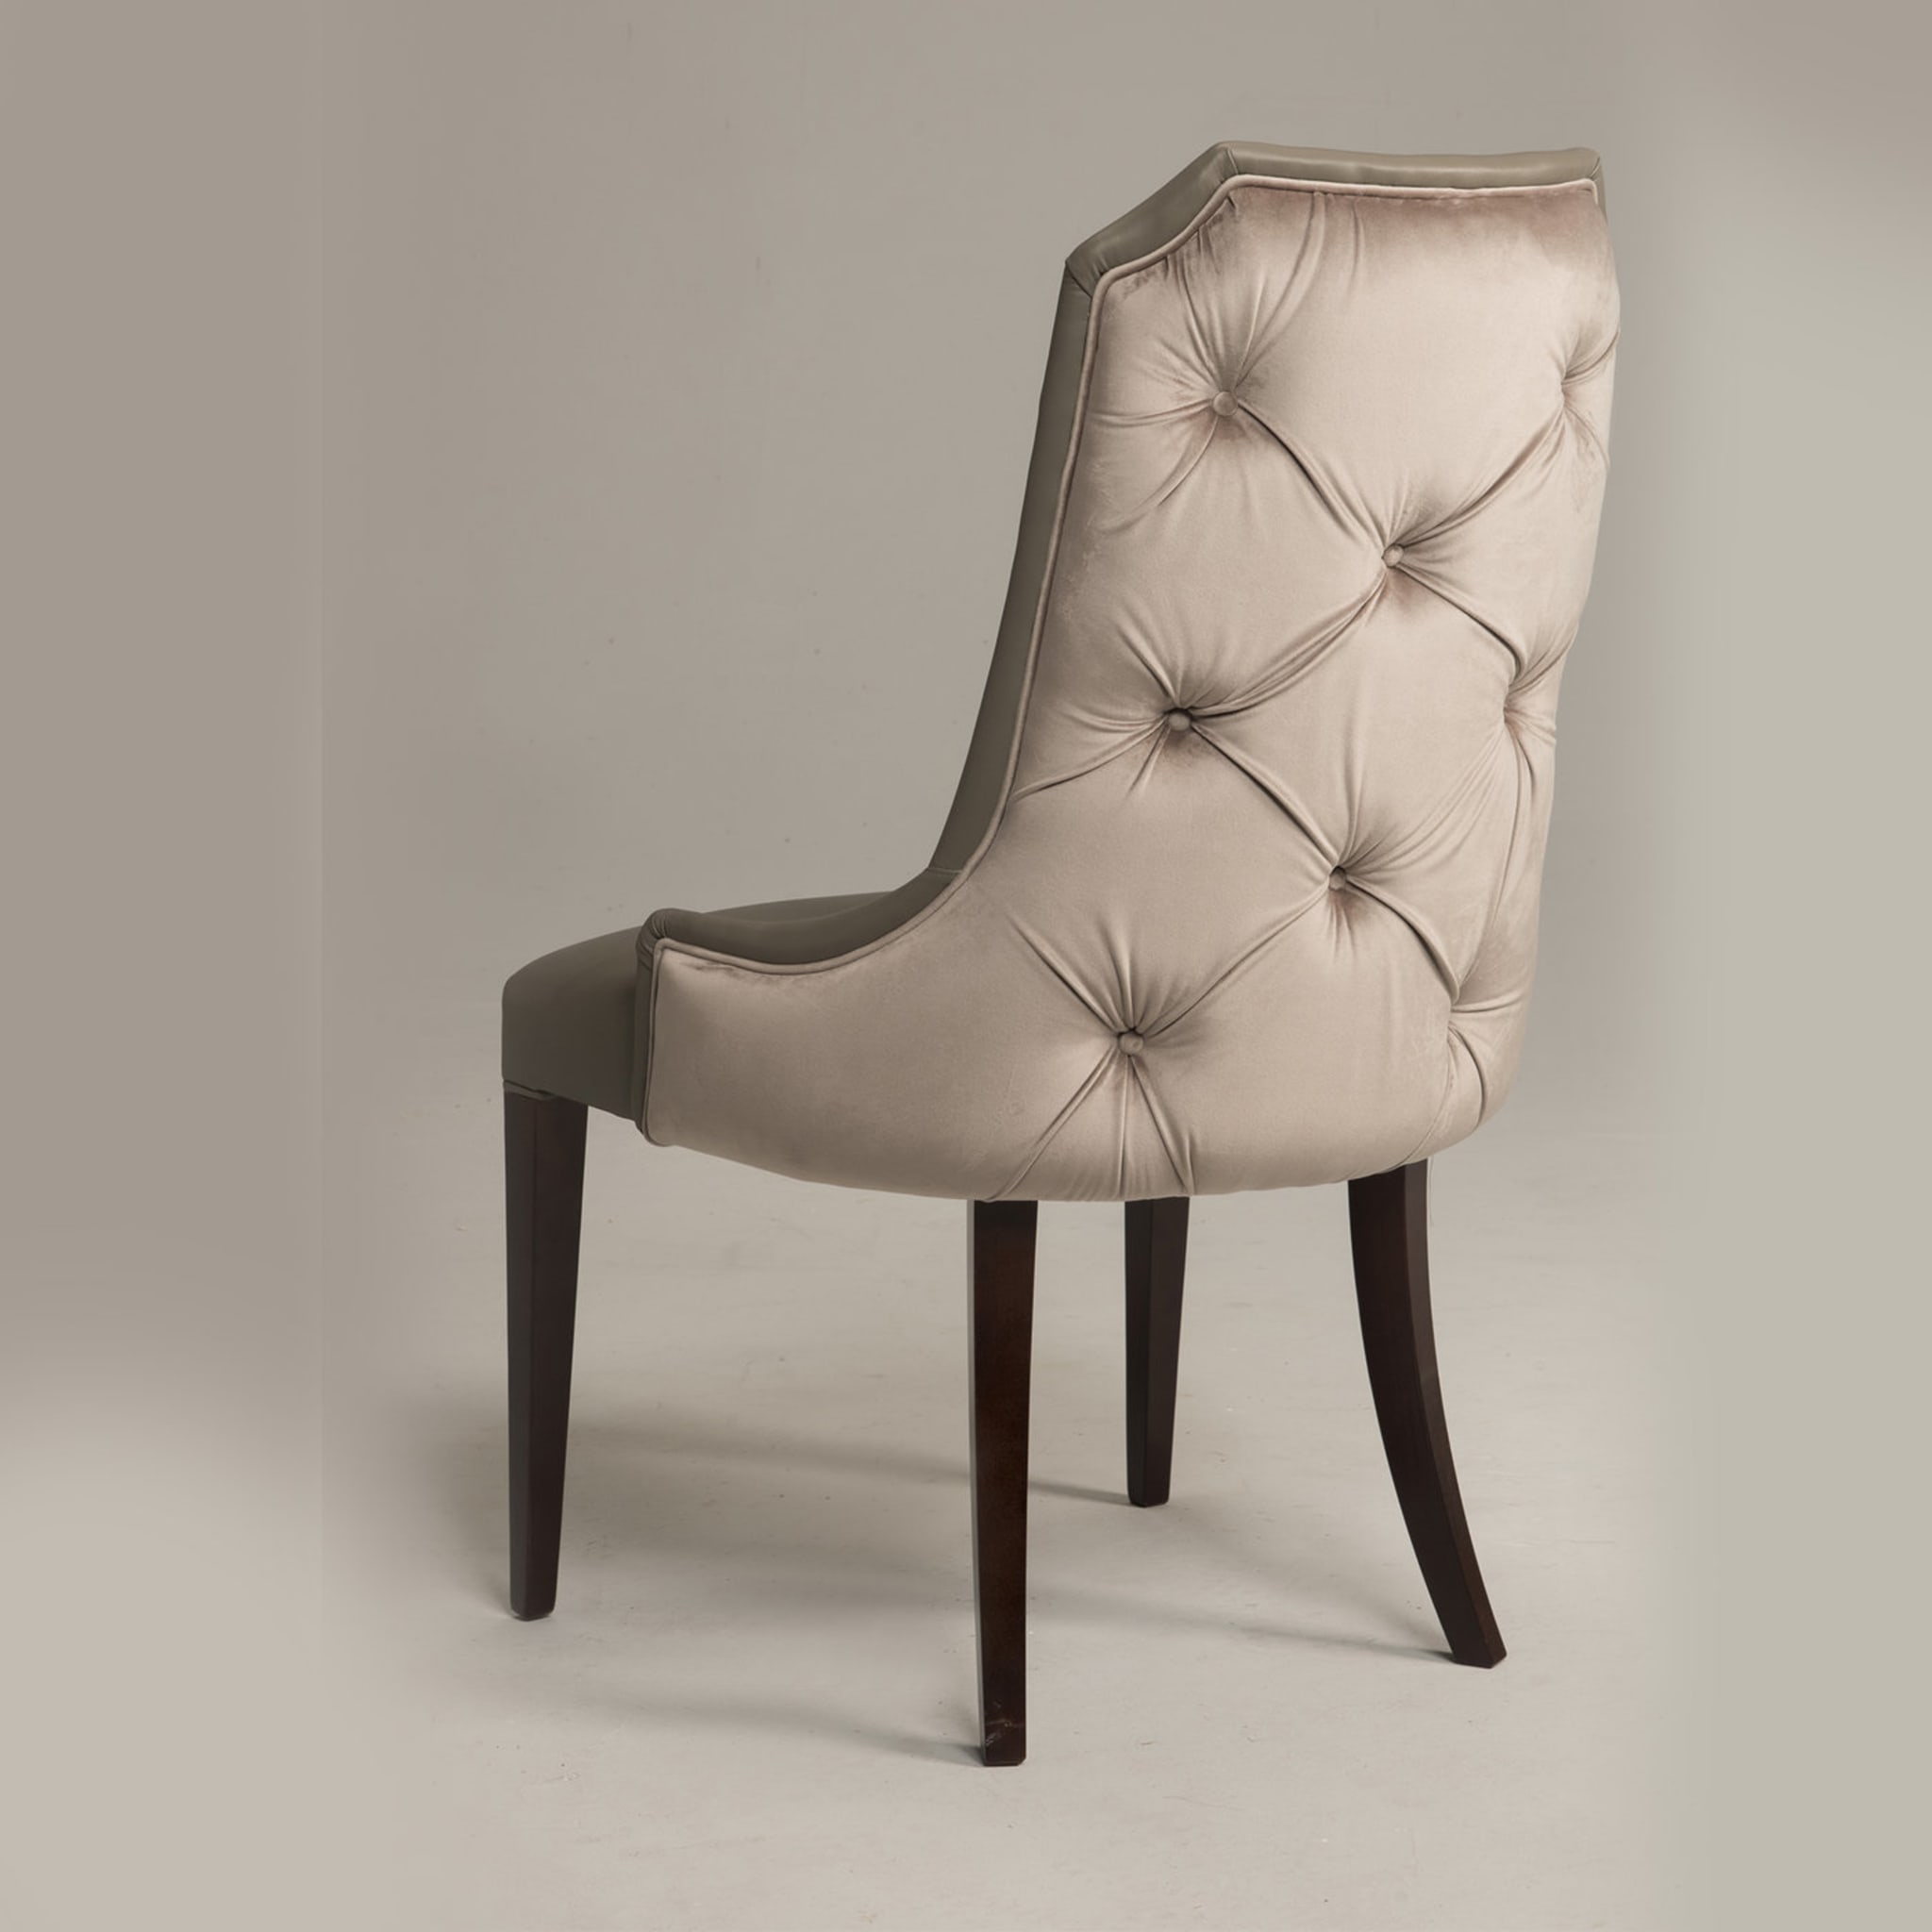 Oscar Tufted Upholstered Chair - Alternative view 1